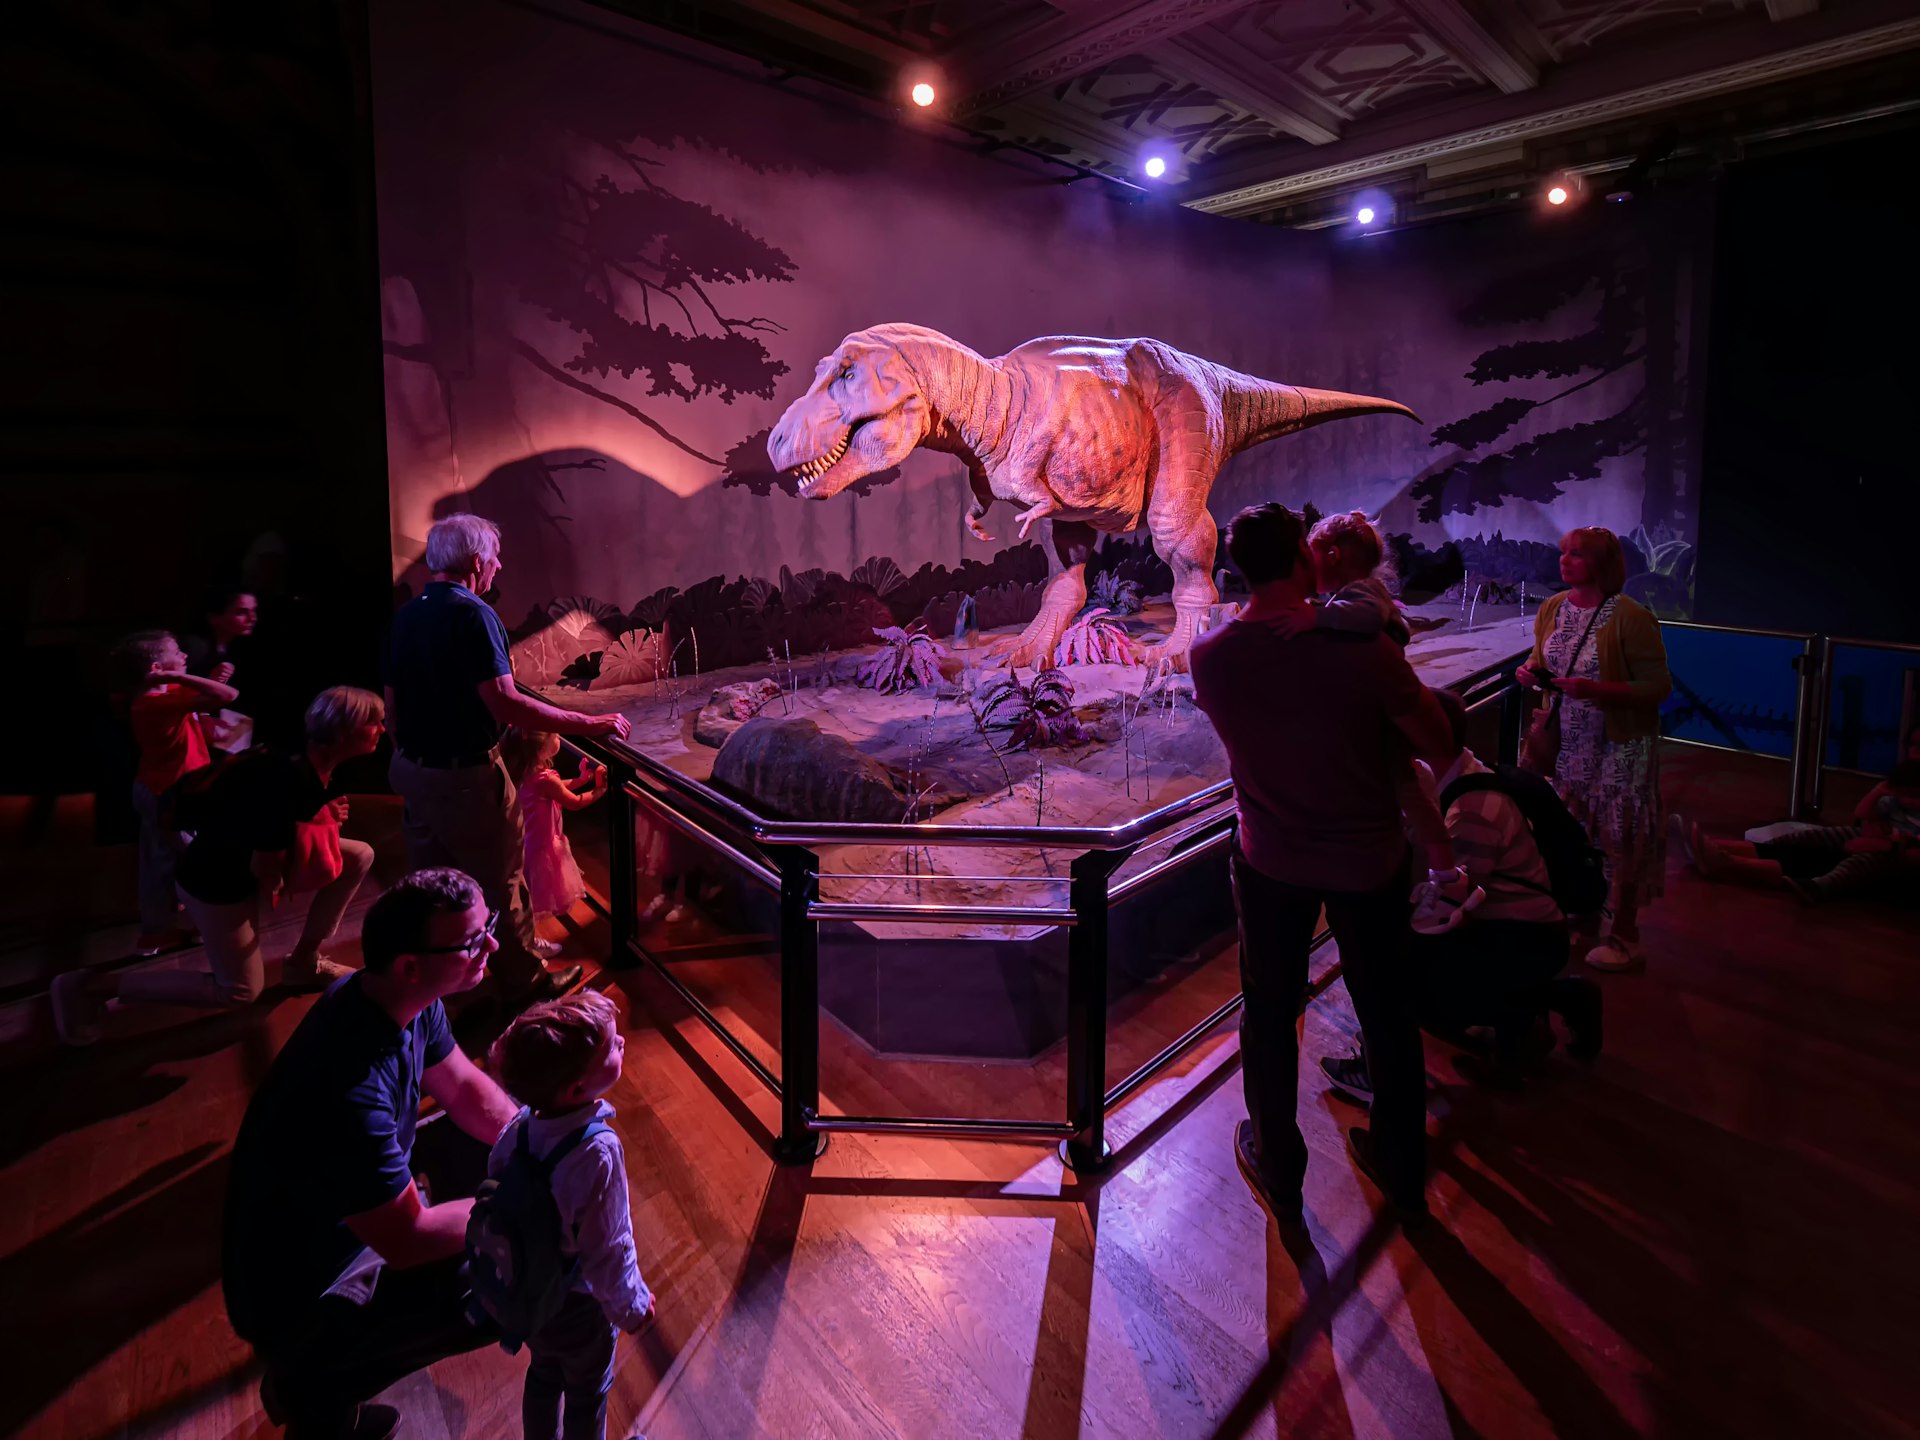 An life-size animatronic T-Rex has everyone's attention in a low-lit room at London's Natural History Museum